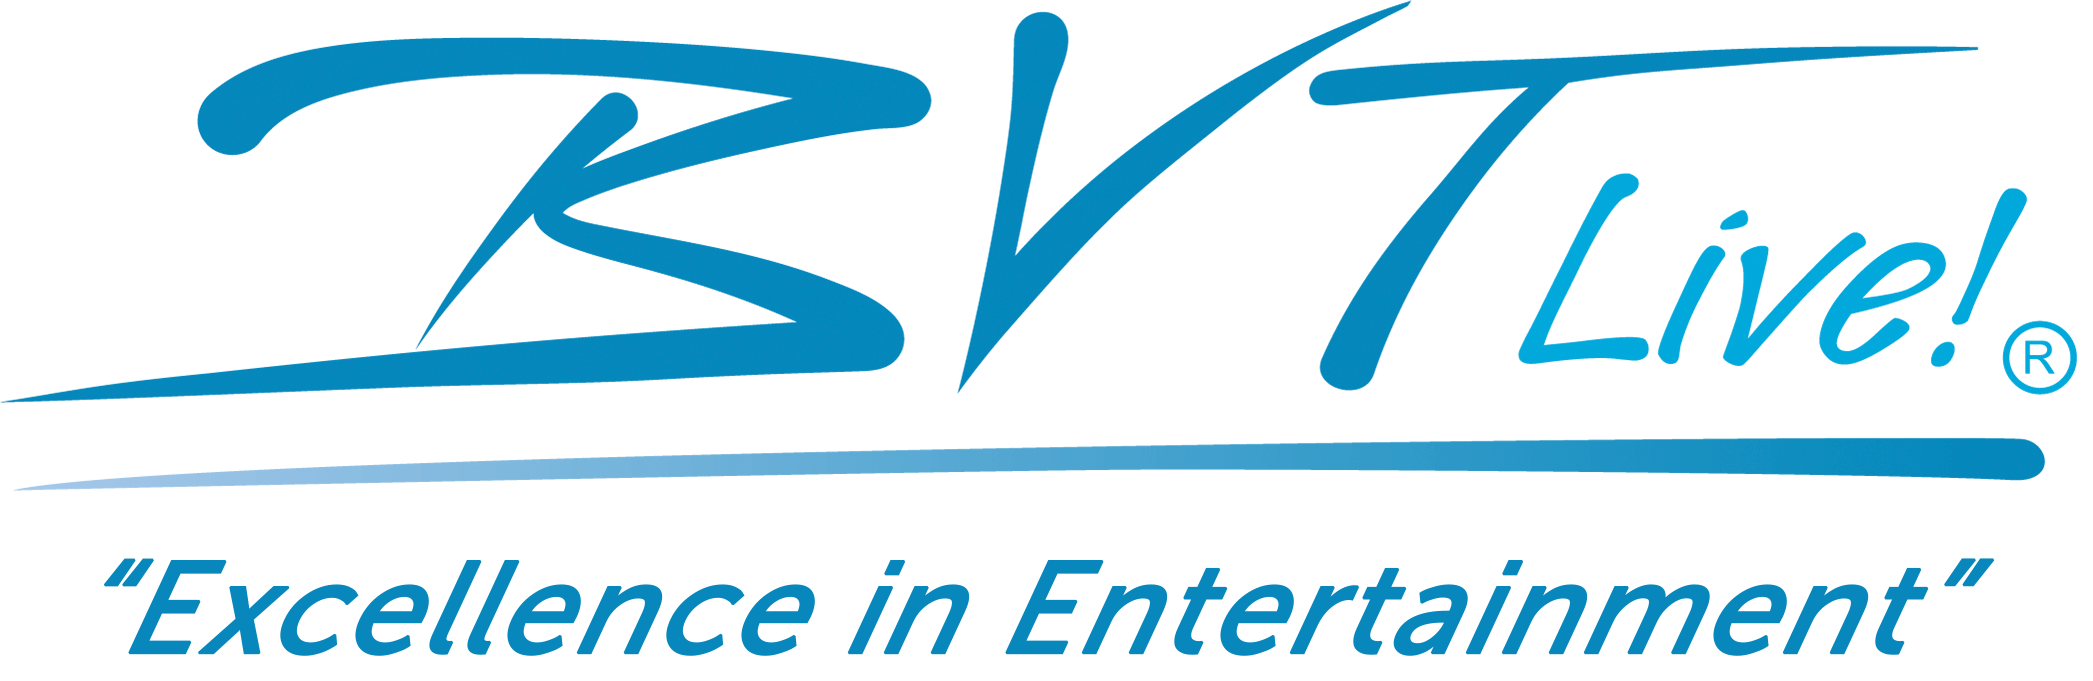 BVTLive - Excellence in Entertainment